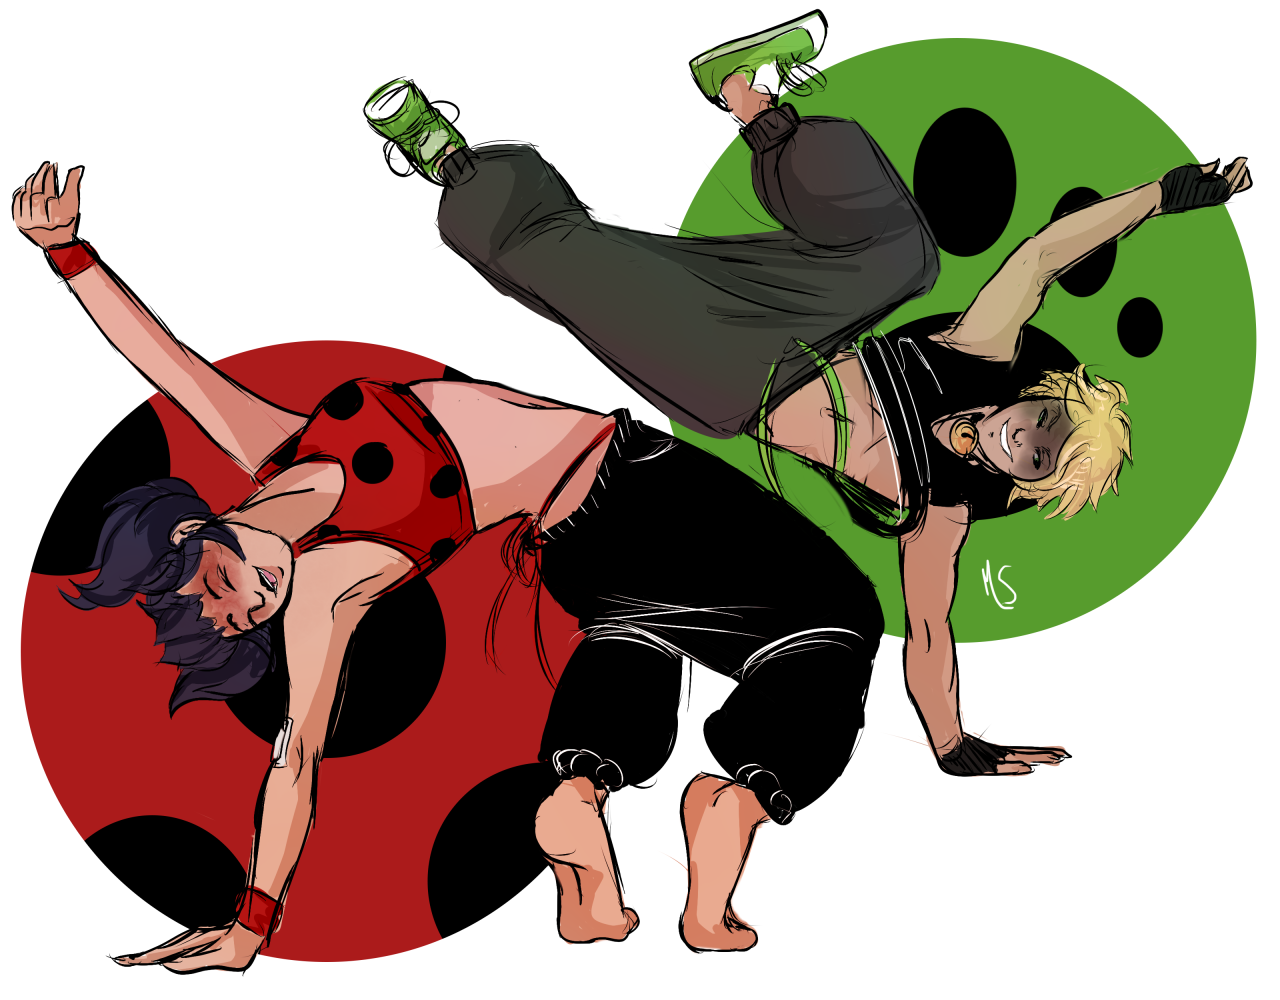 will i ever stop drawing miraculous aus? nah.
really liking @starrycove‘s breakdancing au tbh.